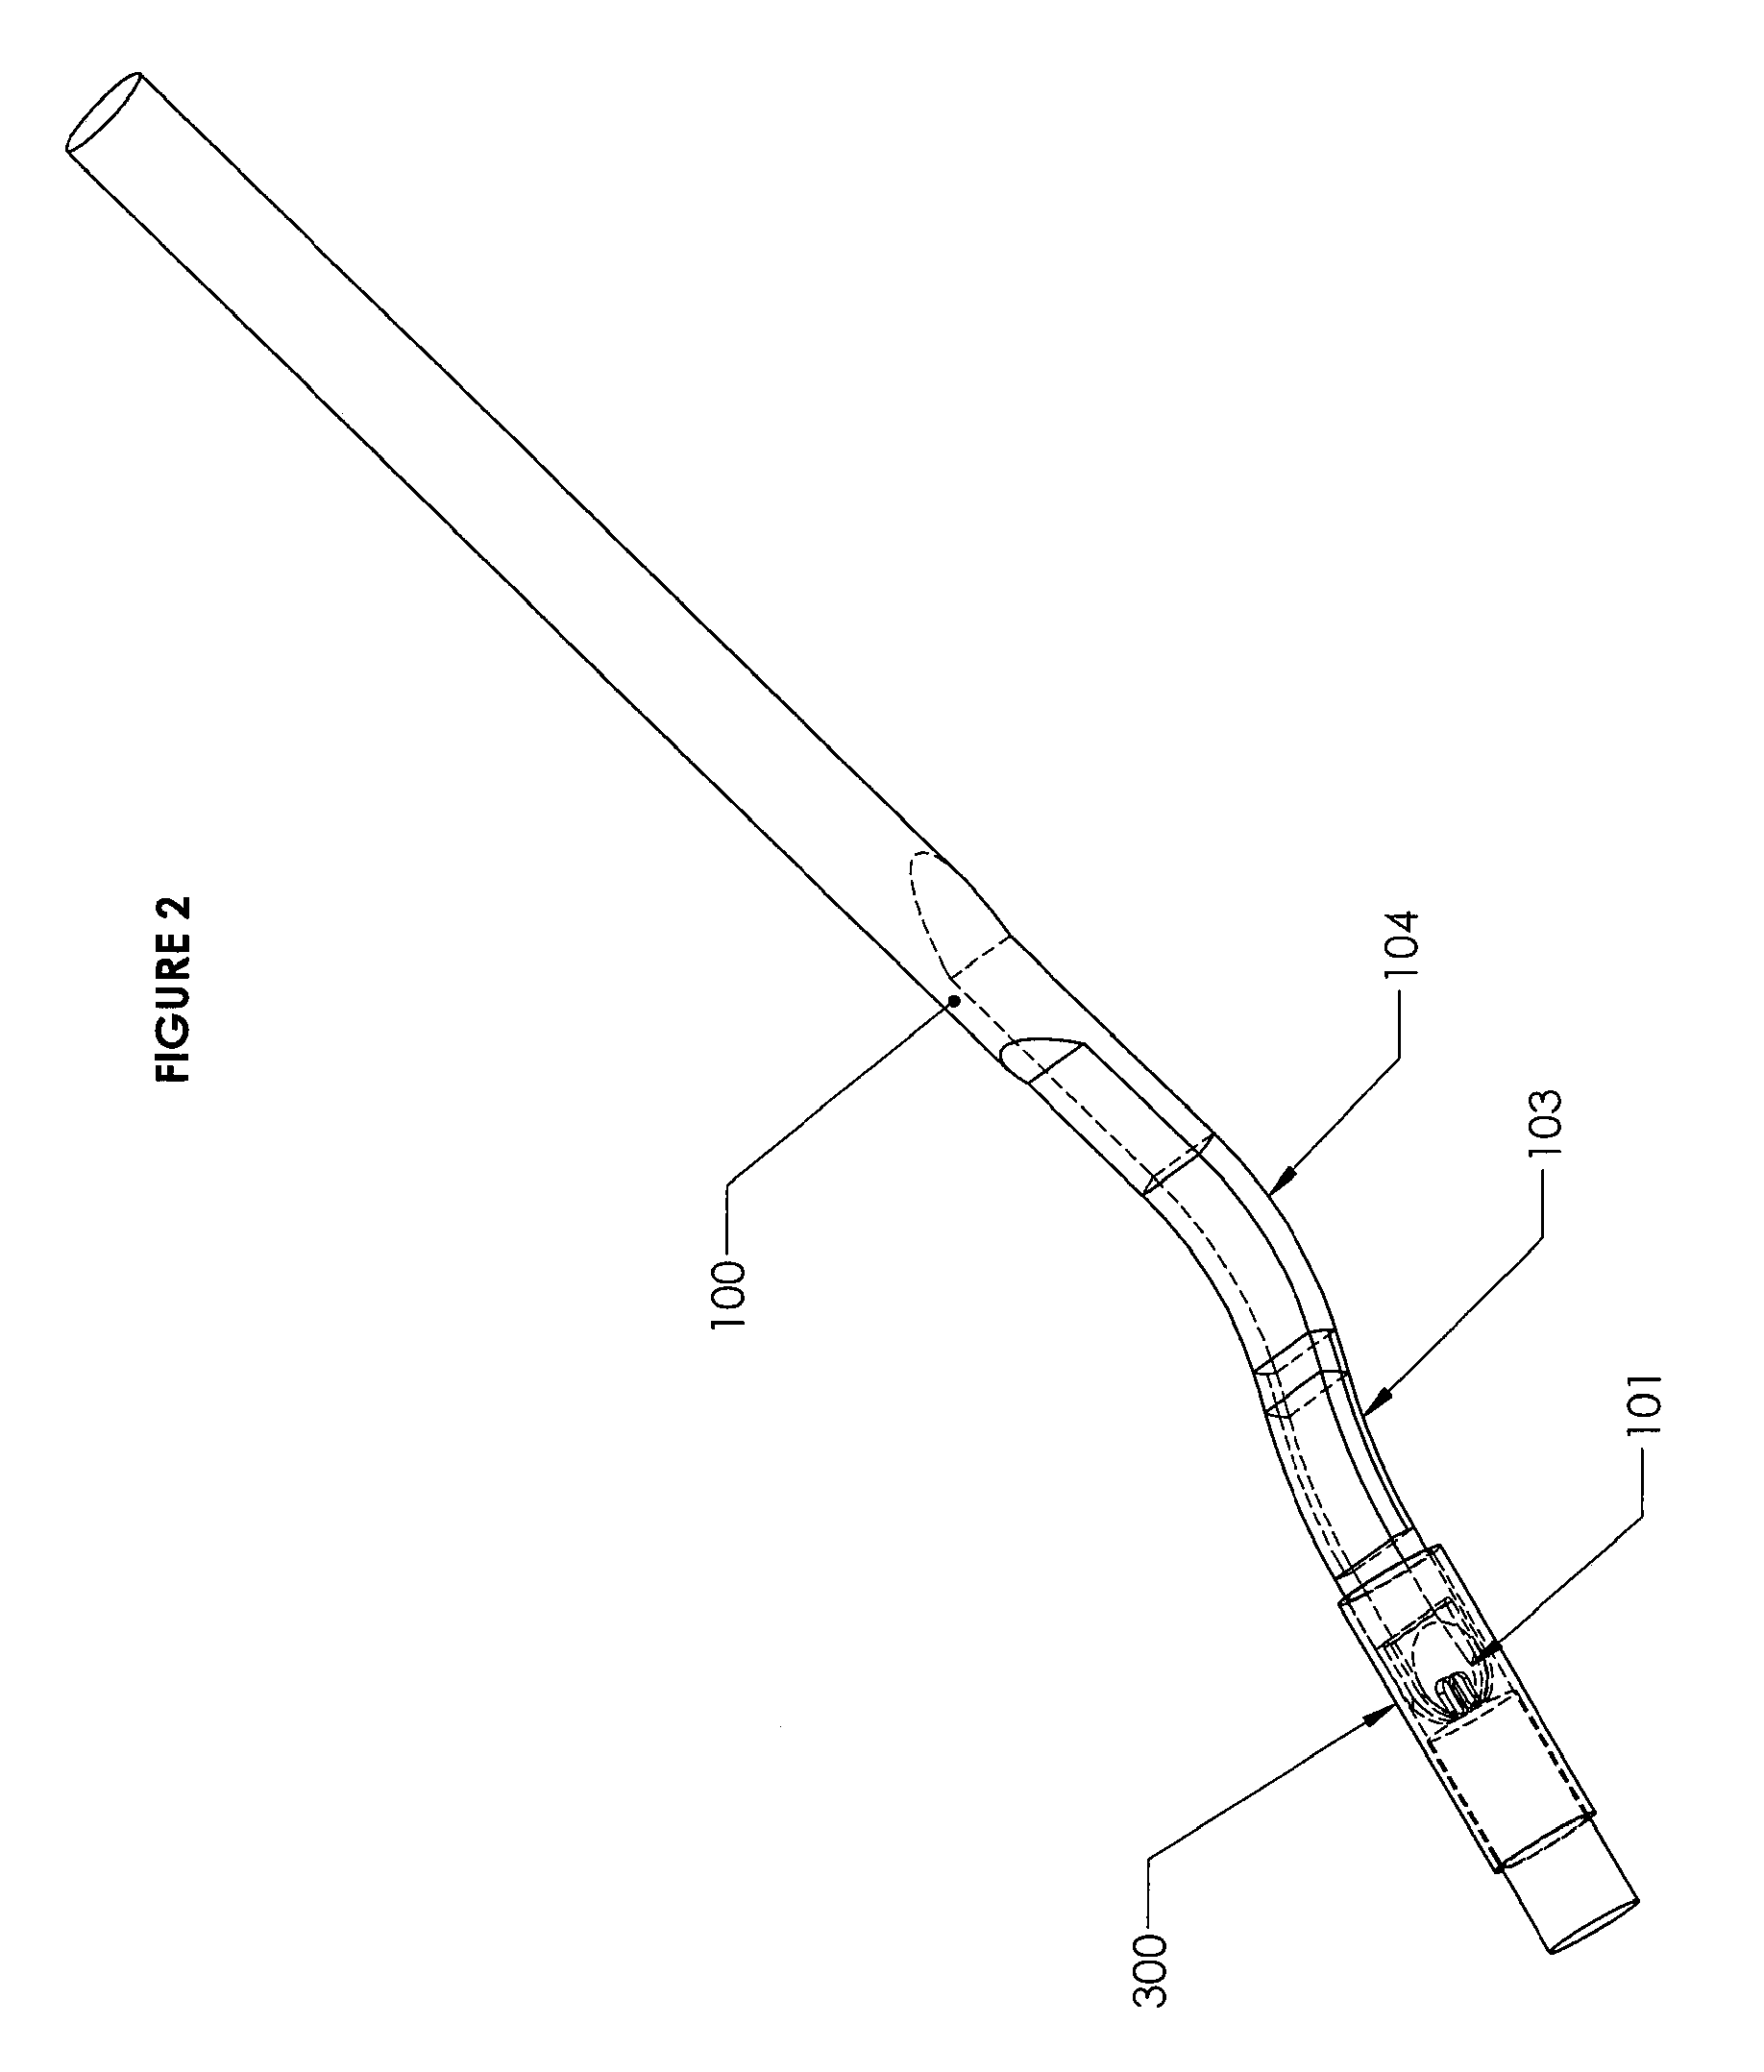 Insertion system for corneal implants